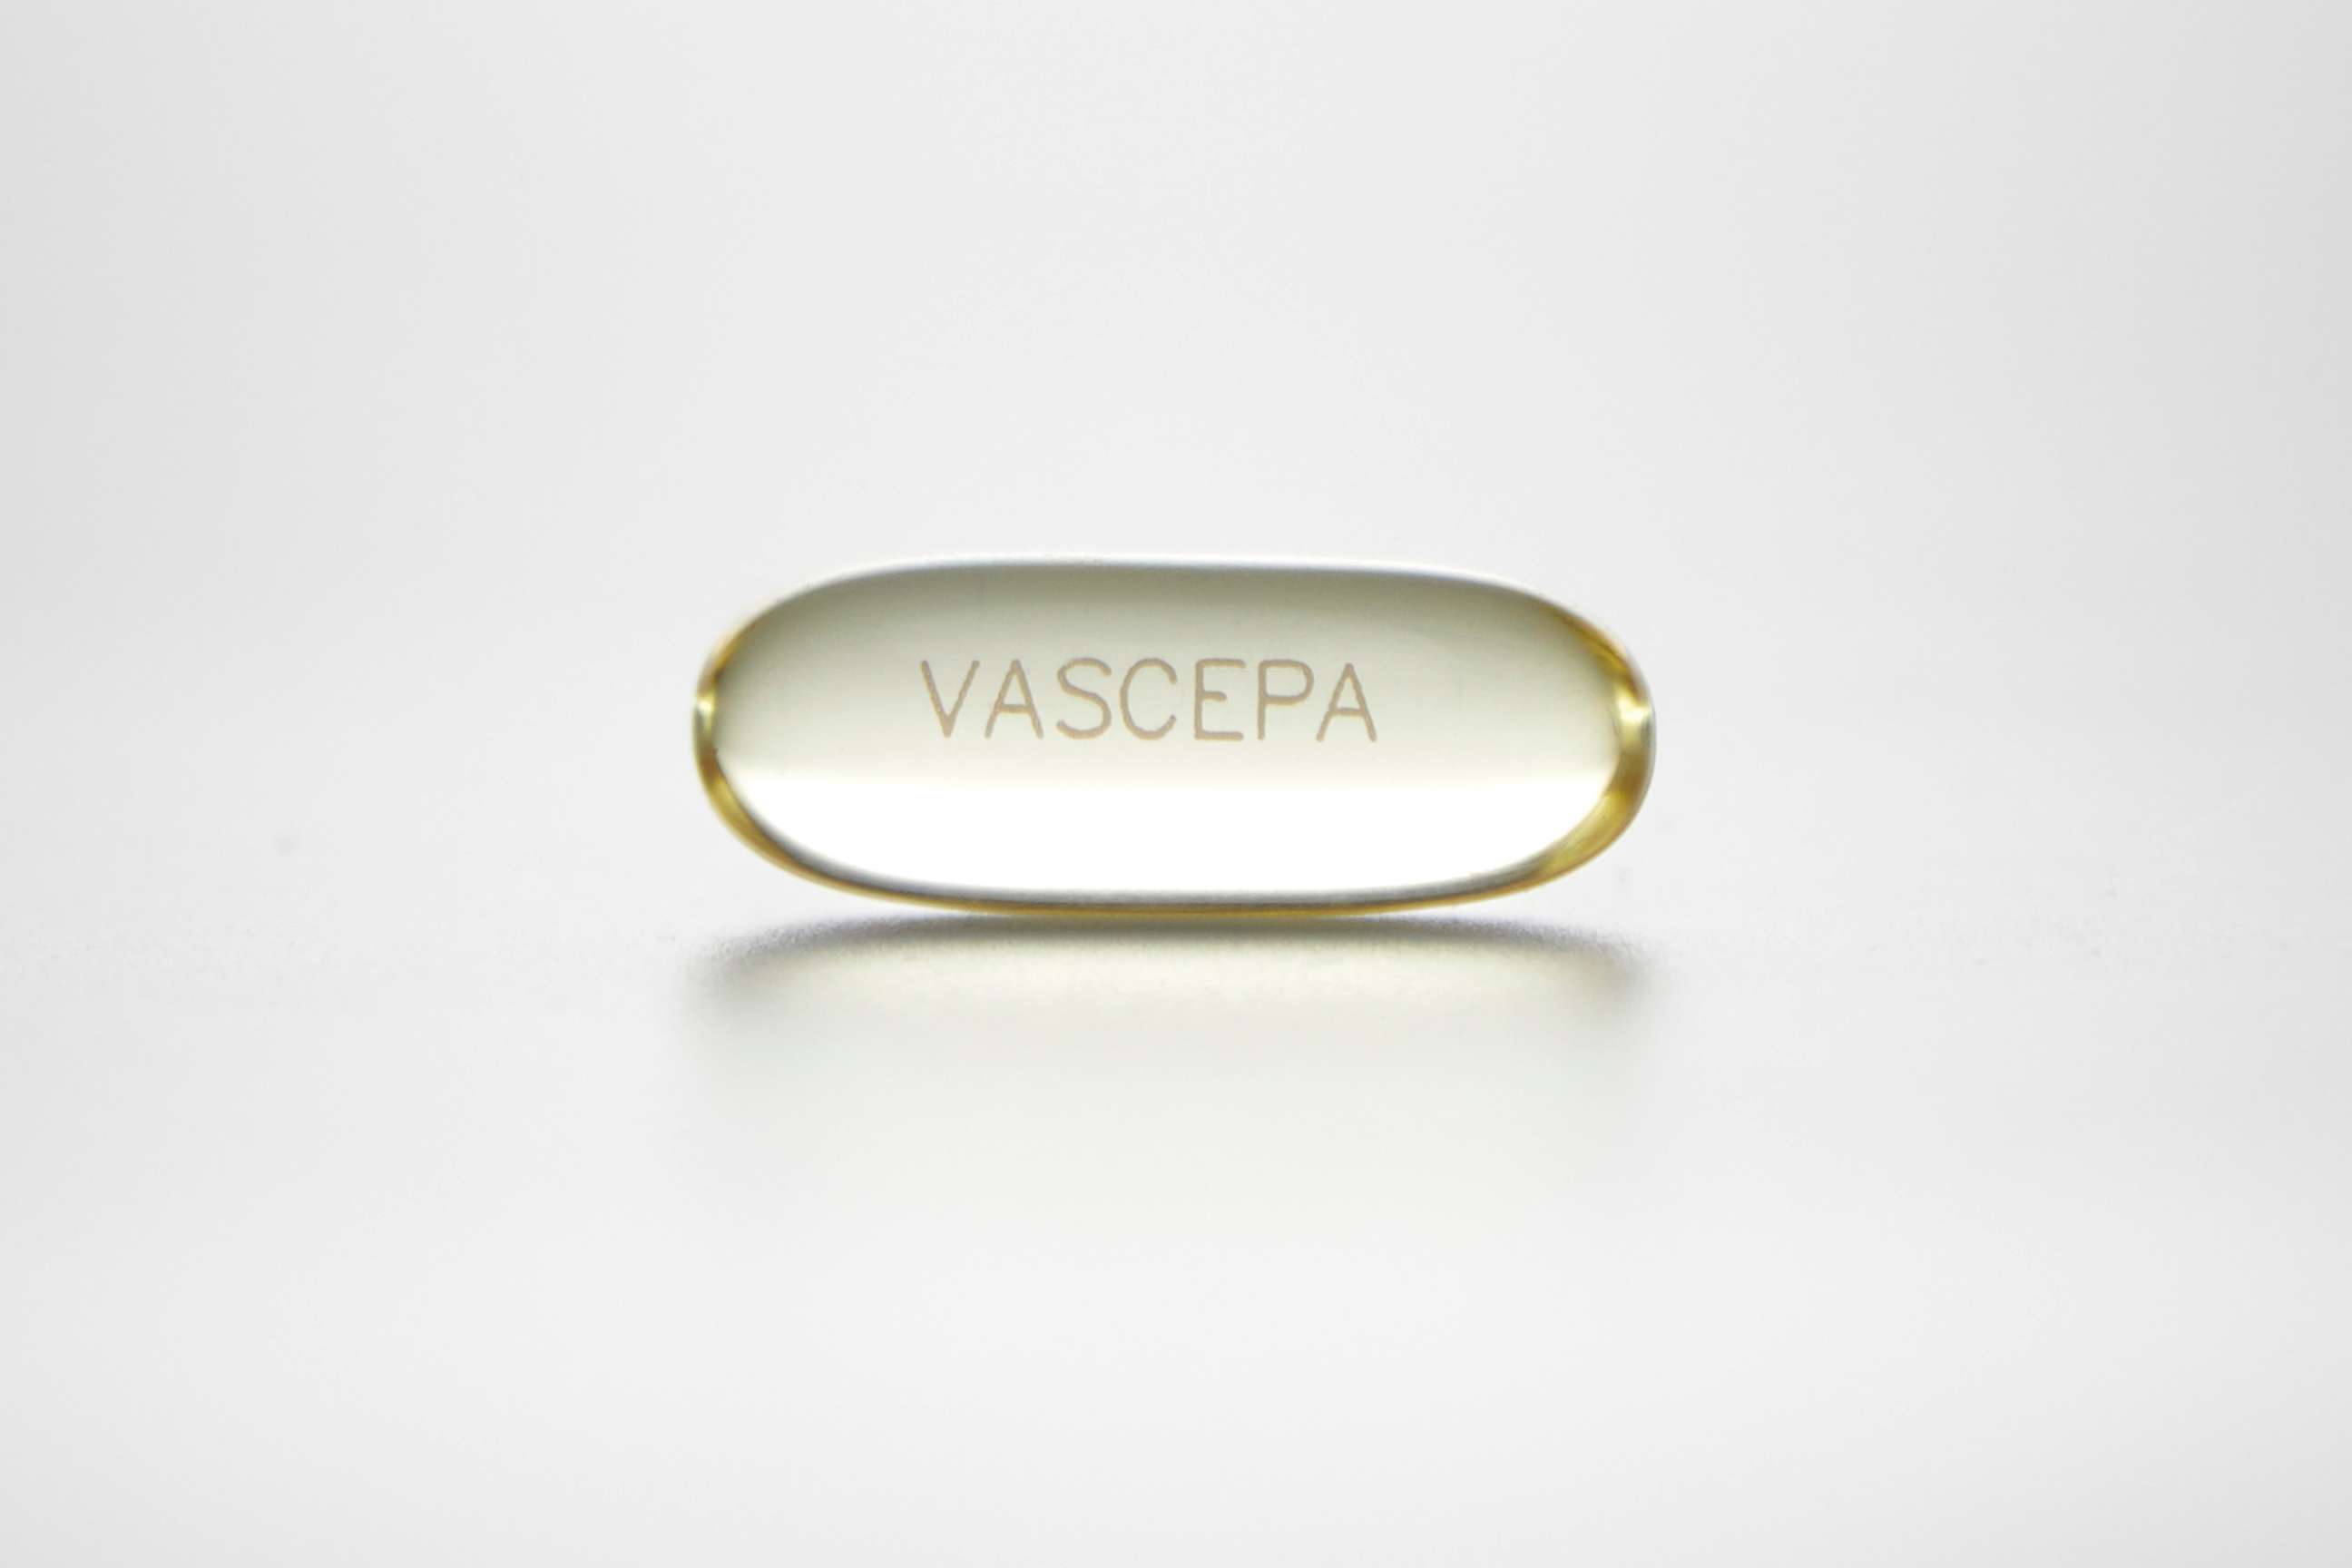 PHOTO: This undated photo provided by Amarin shows a capsule of the purified, prescription fish oil Vascepa. On Dec. 13, 2019, U.S. regulators approved expanded use of the medication for preventing serious heart complications in high-risk patients.